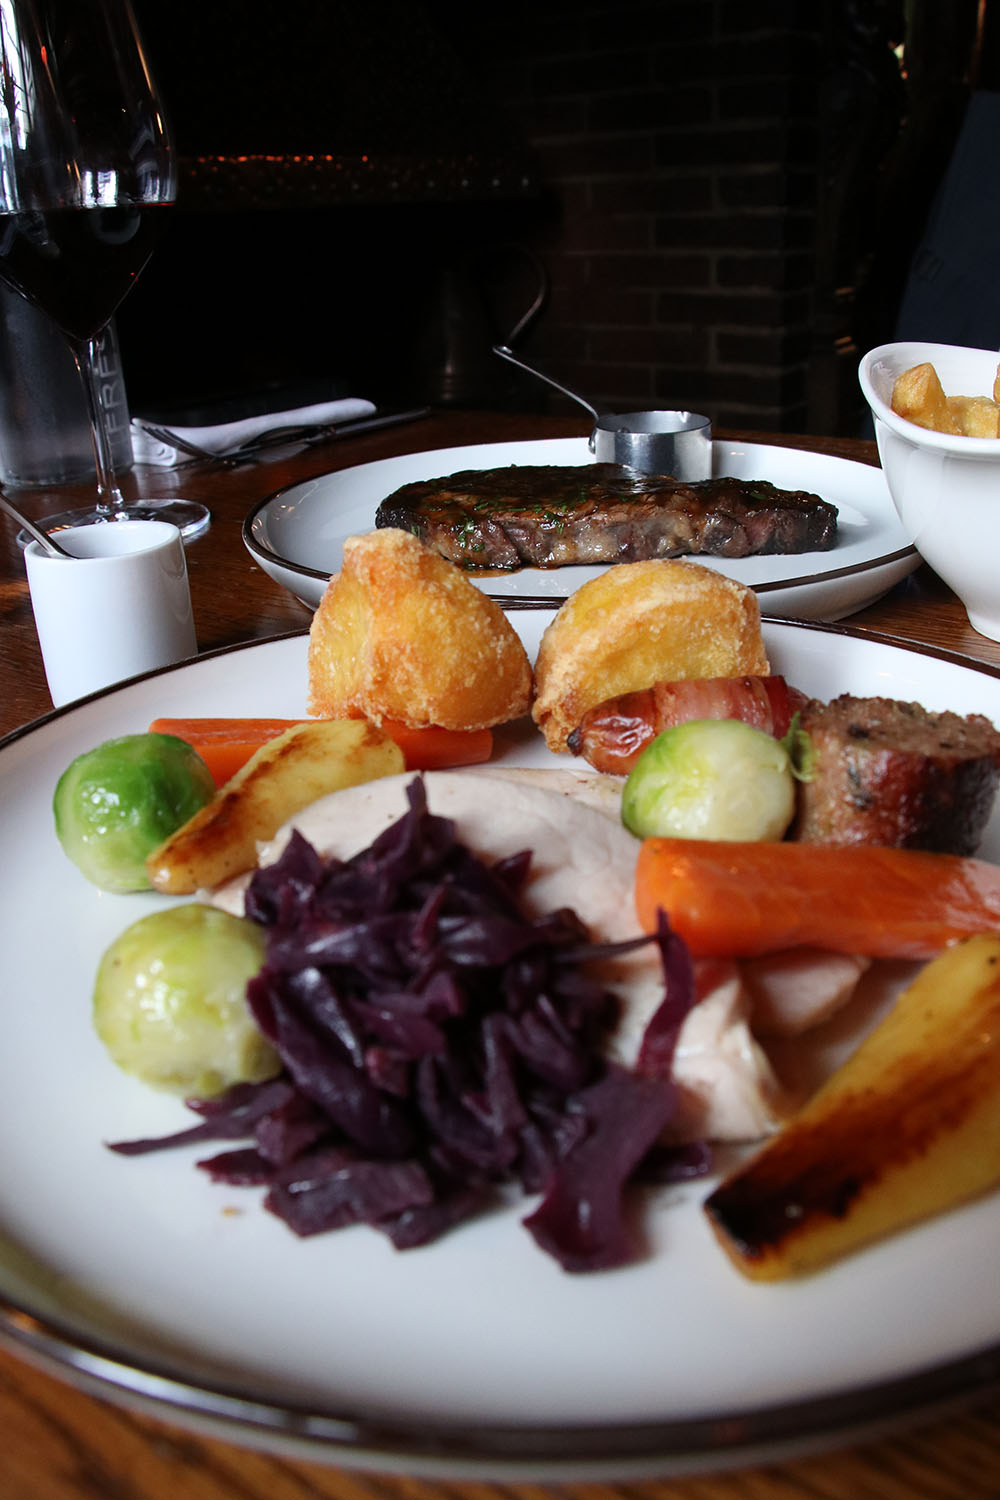 hinds-head-bray-review-food-capital-england